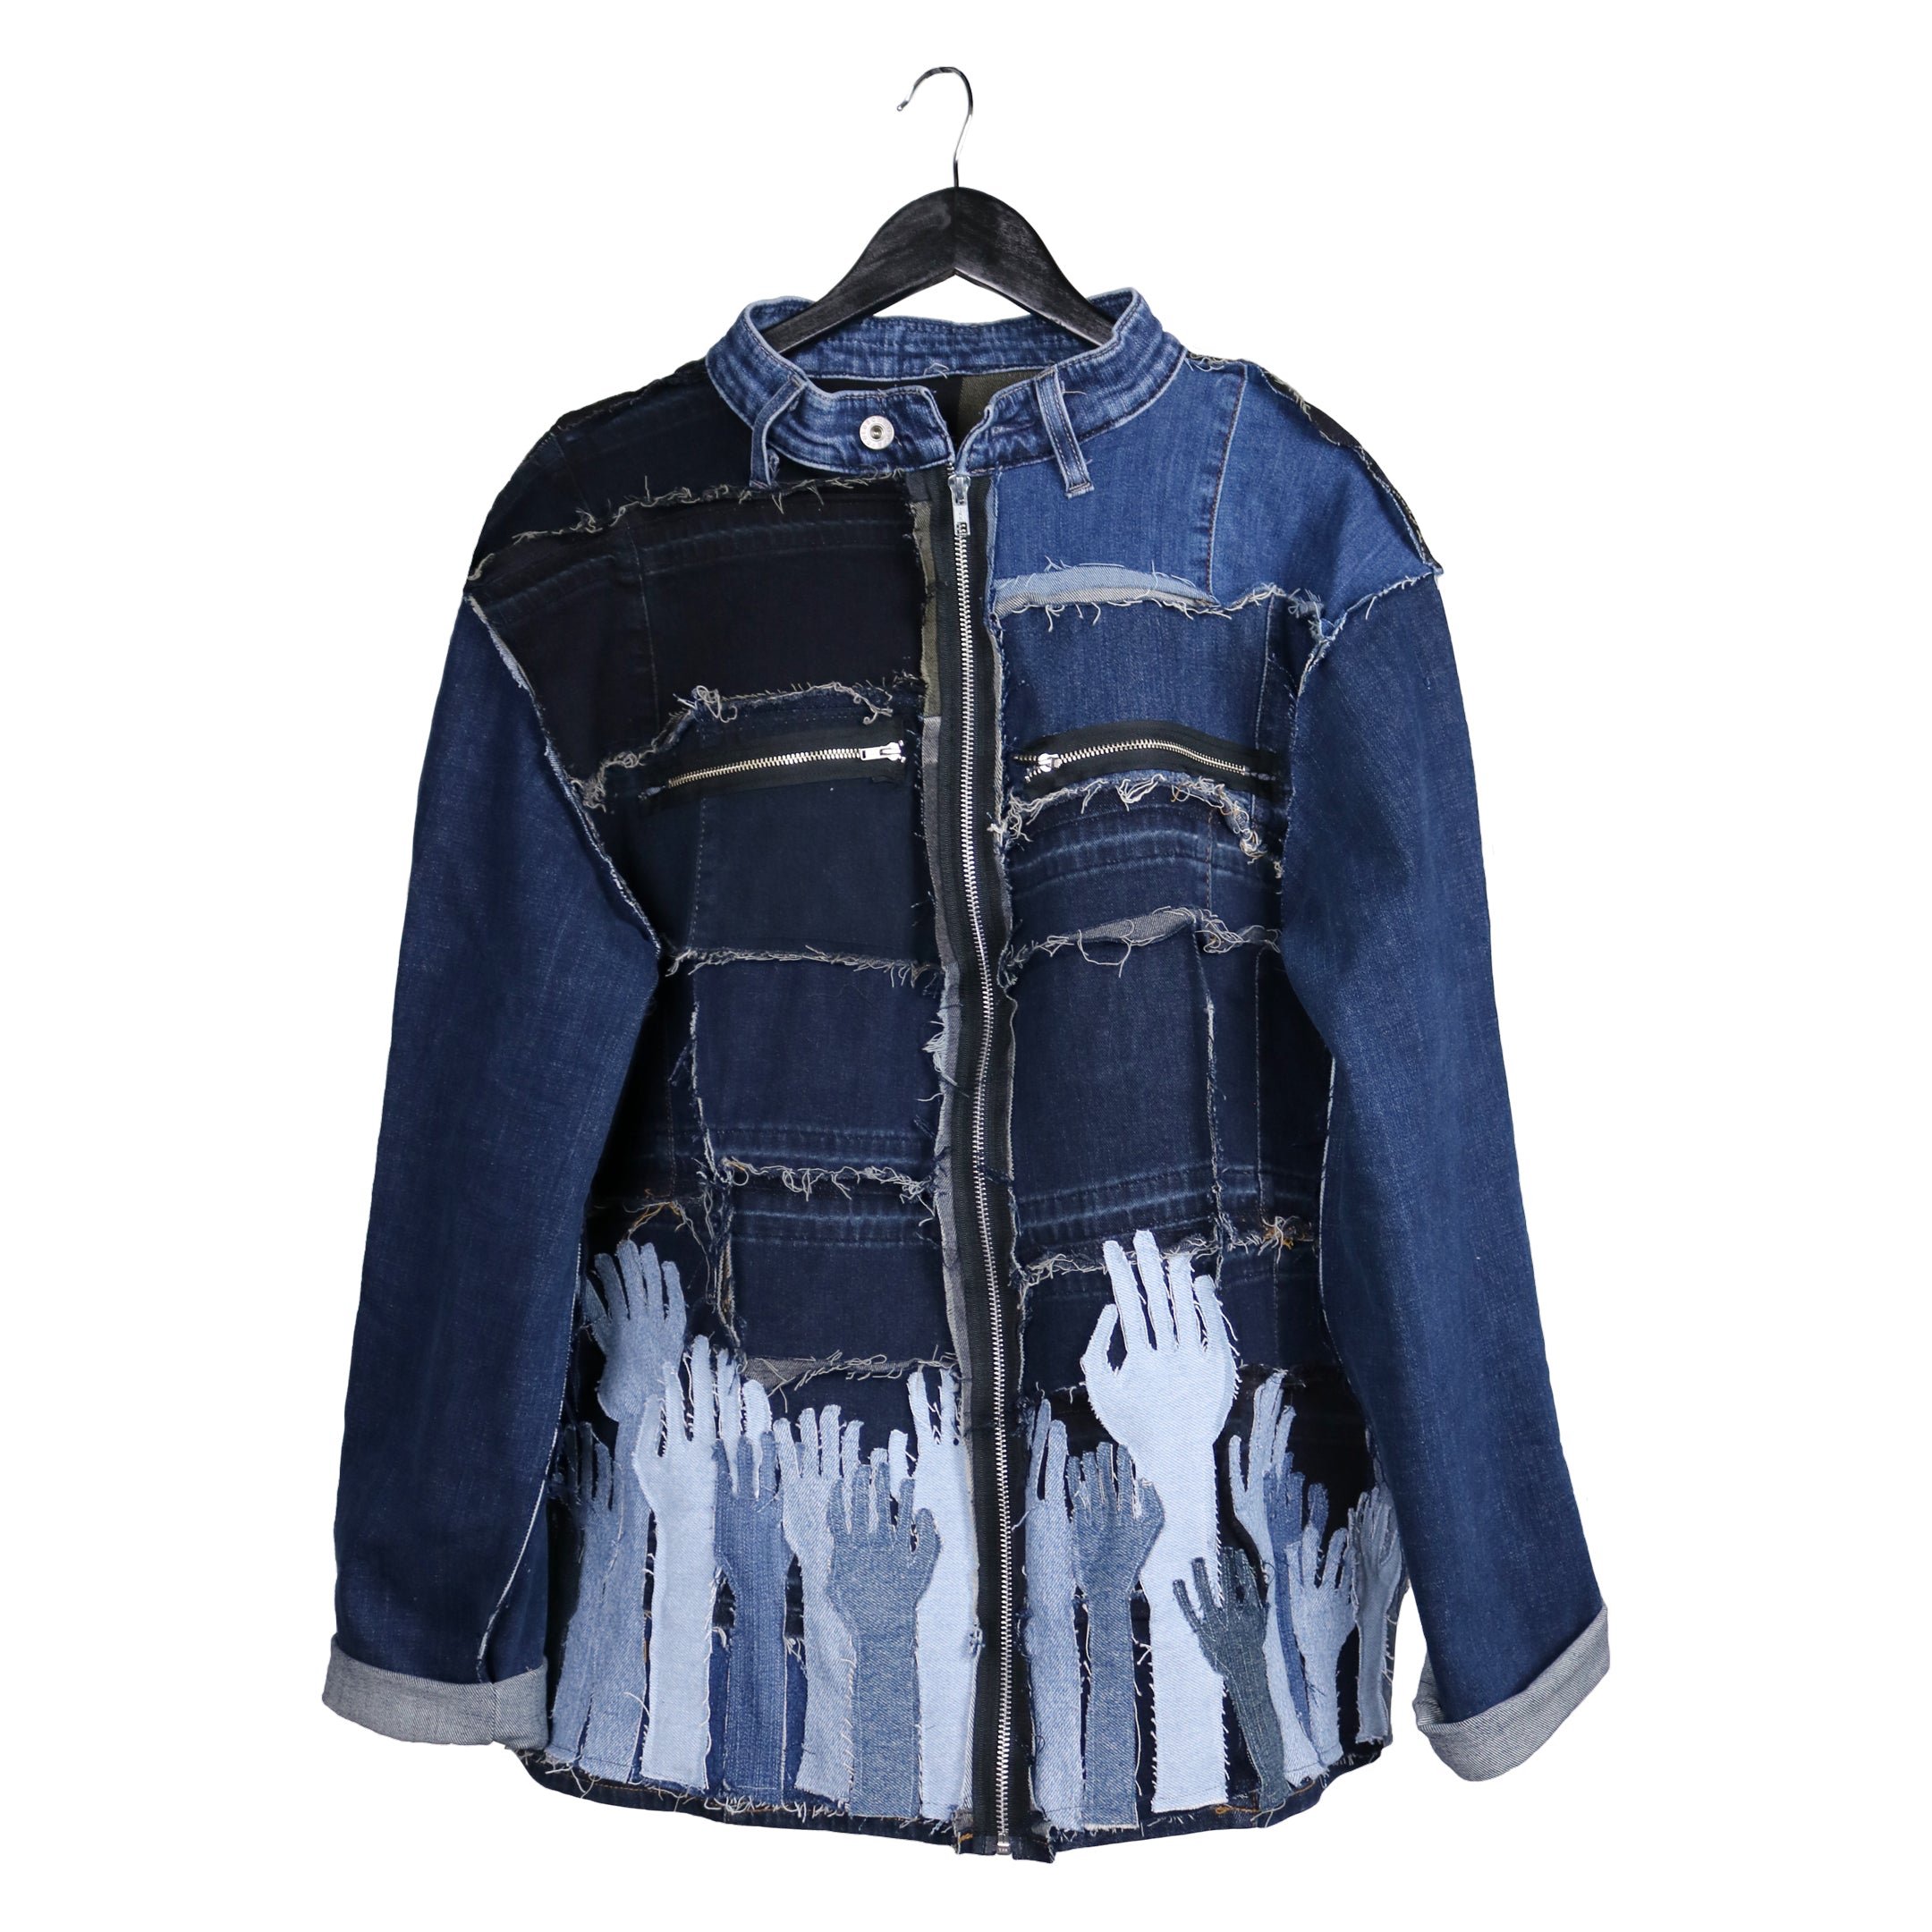 remix by stevie leigh upcycled denim jacket with hands